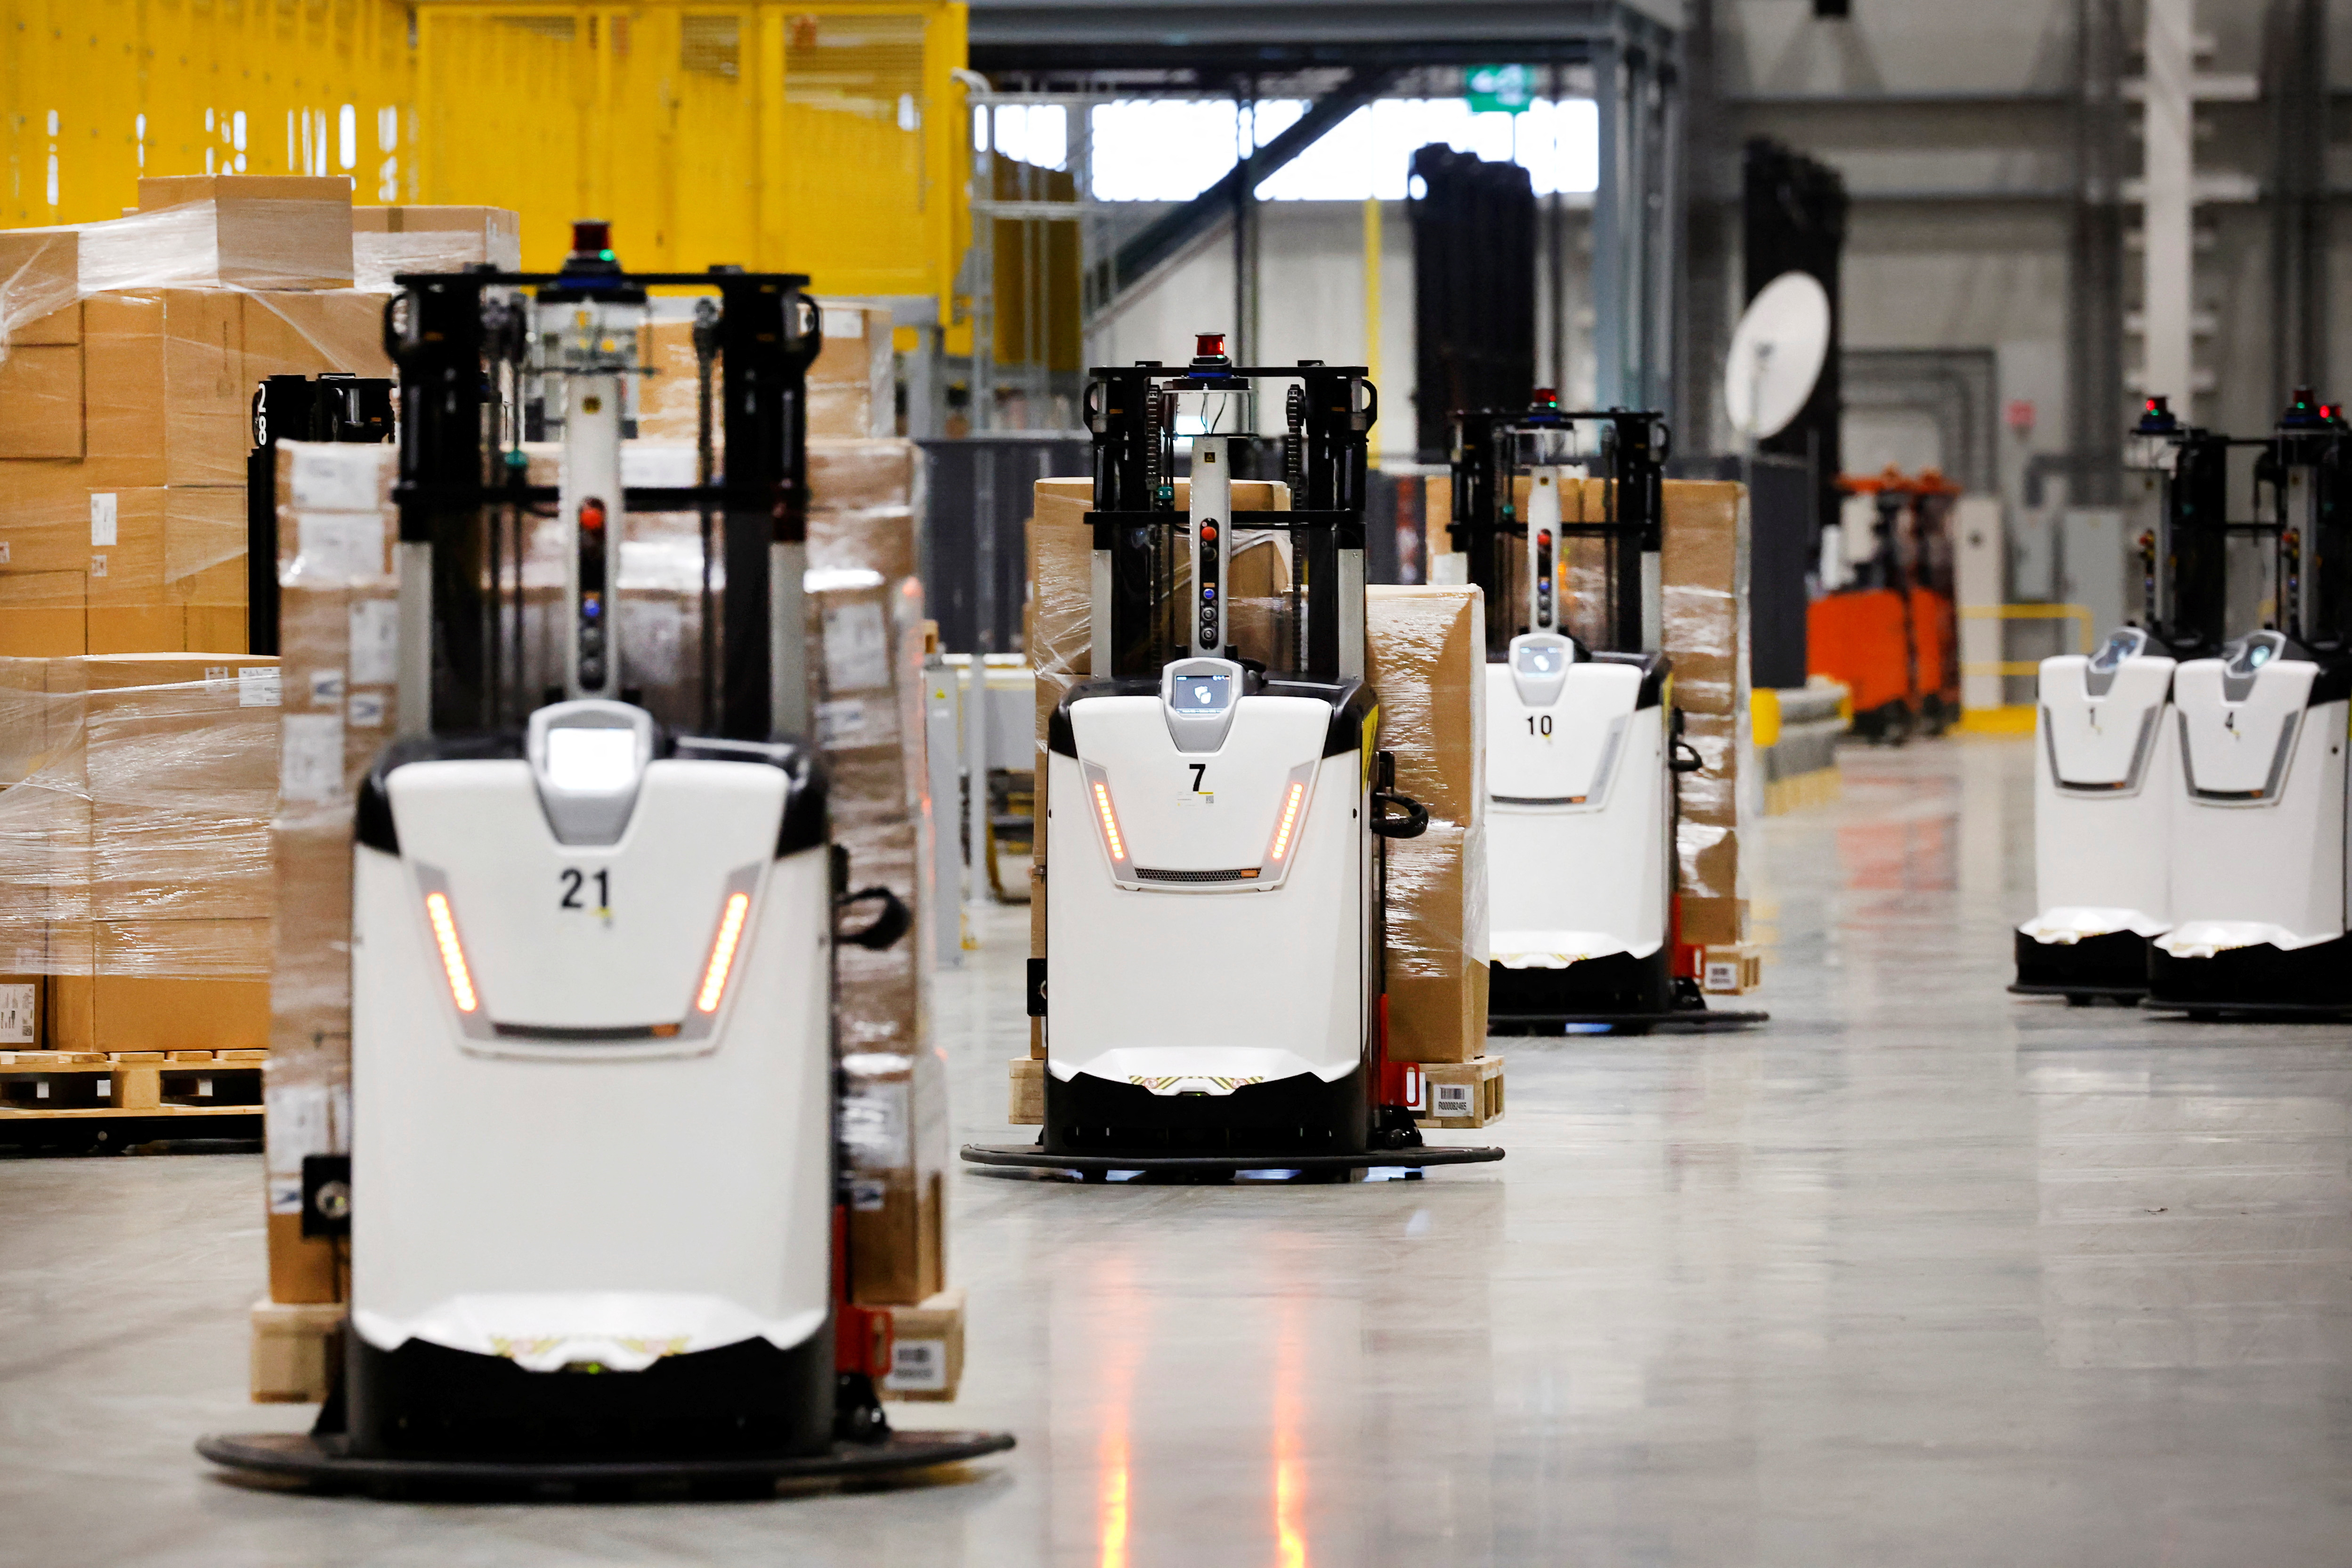 Autonomous guided vehicles are seen at Primark's warehouse in Roosendaal